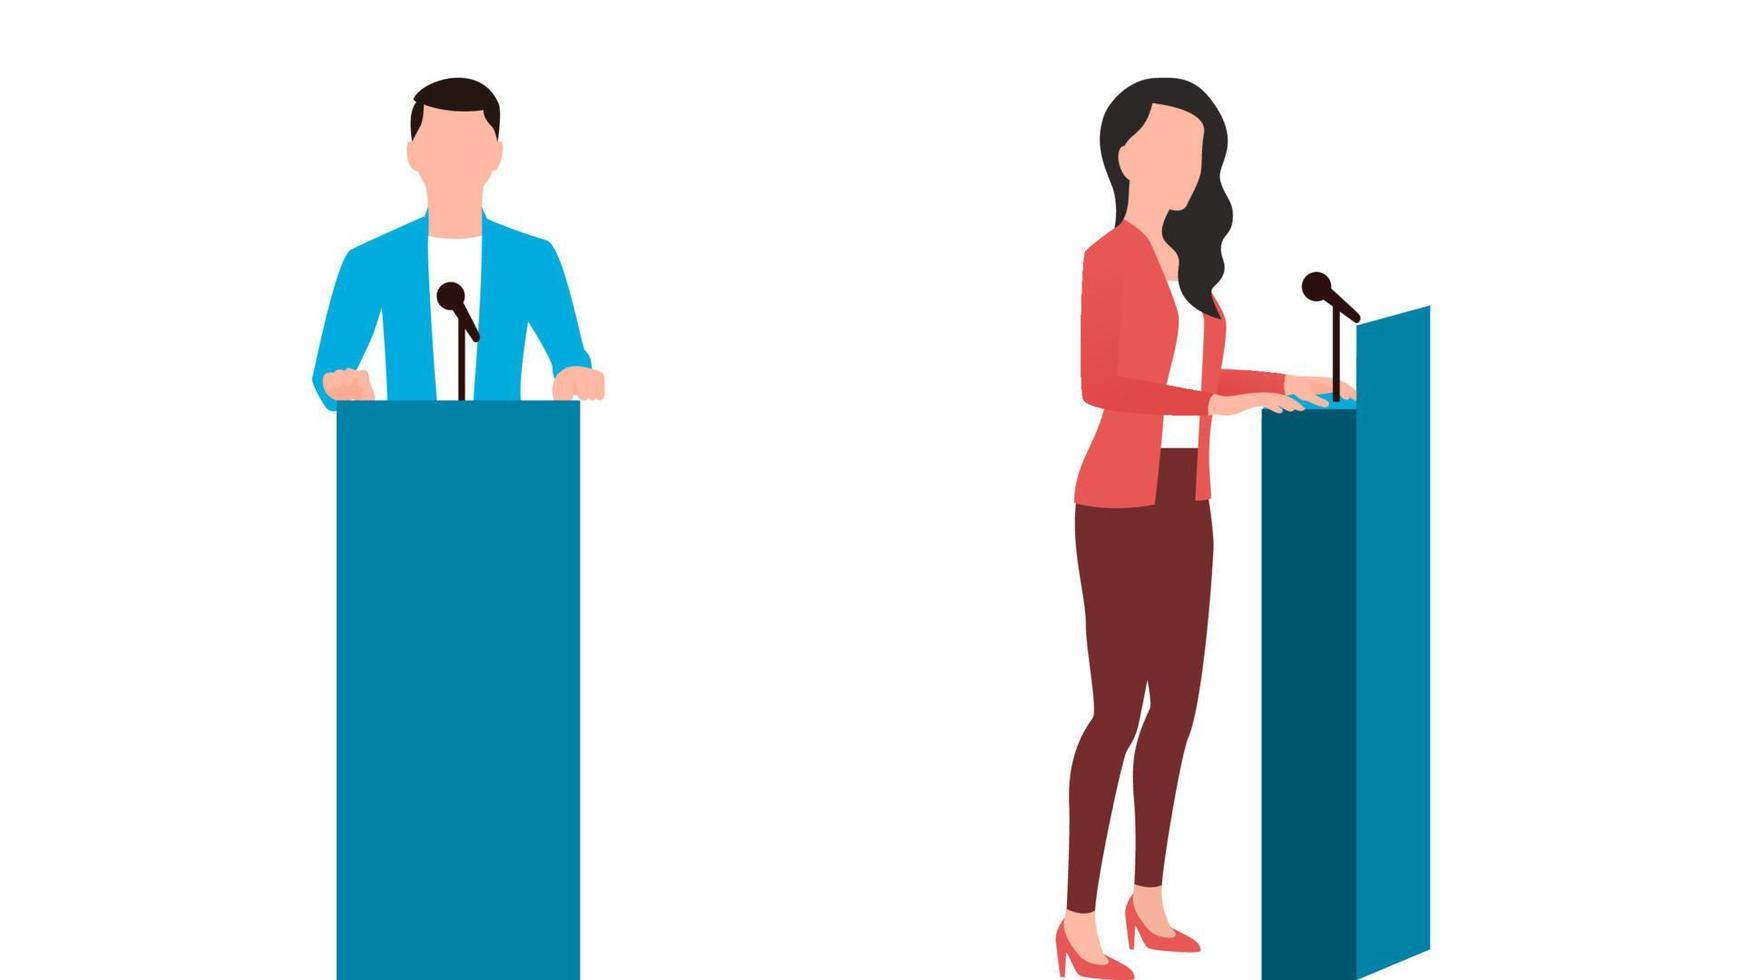 man and woman giving speech flat character vector illustration set, business character vector illustration.